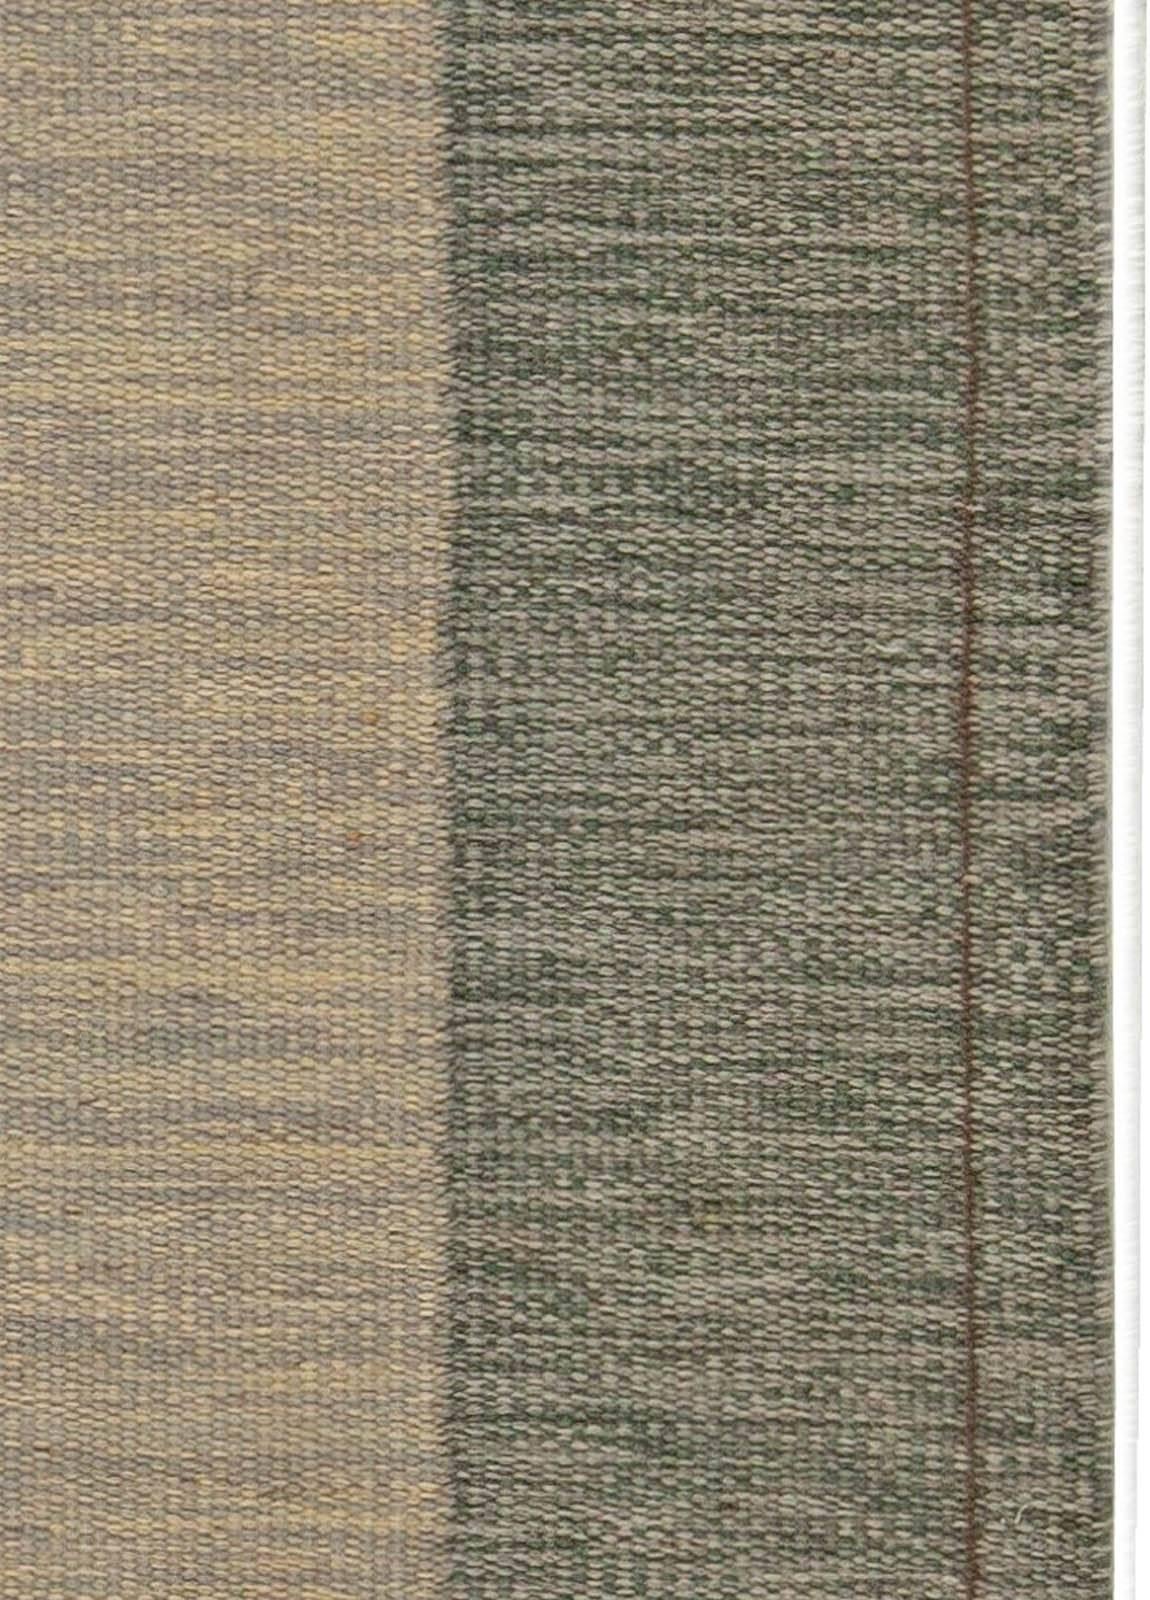 High-quality Vintage Swedish Flat-Weave Wool Rug Signed by Ingegerd Silow 1